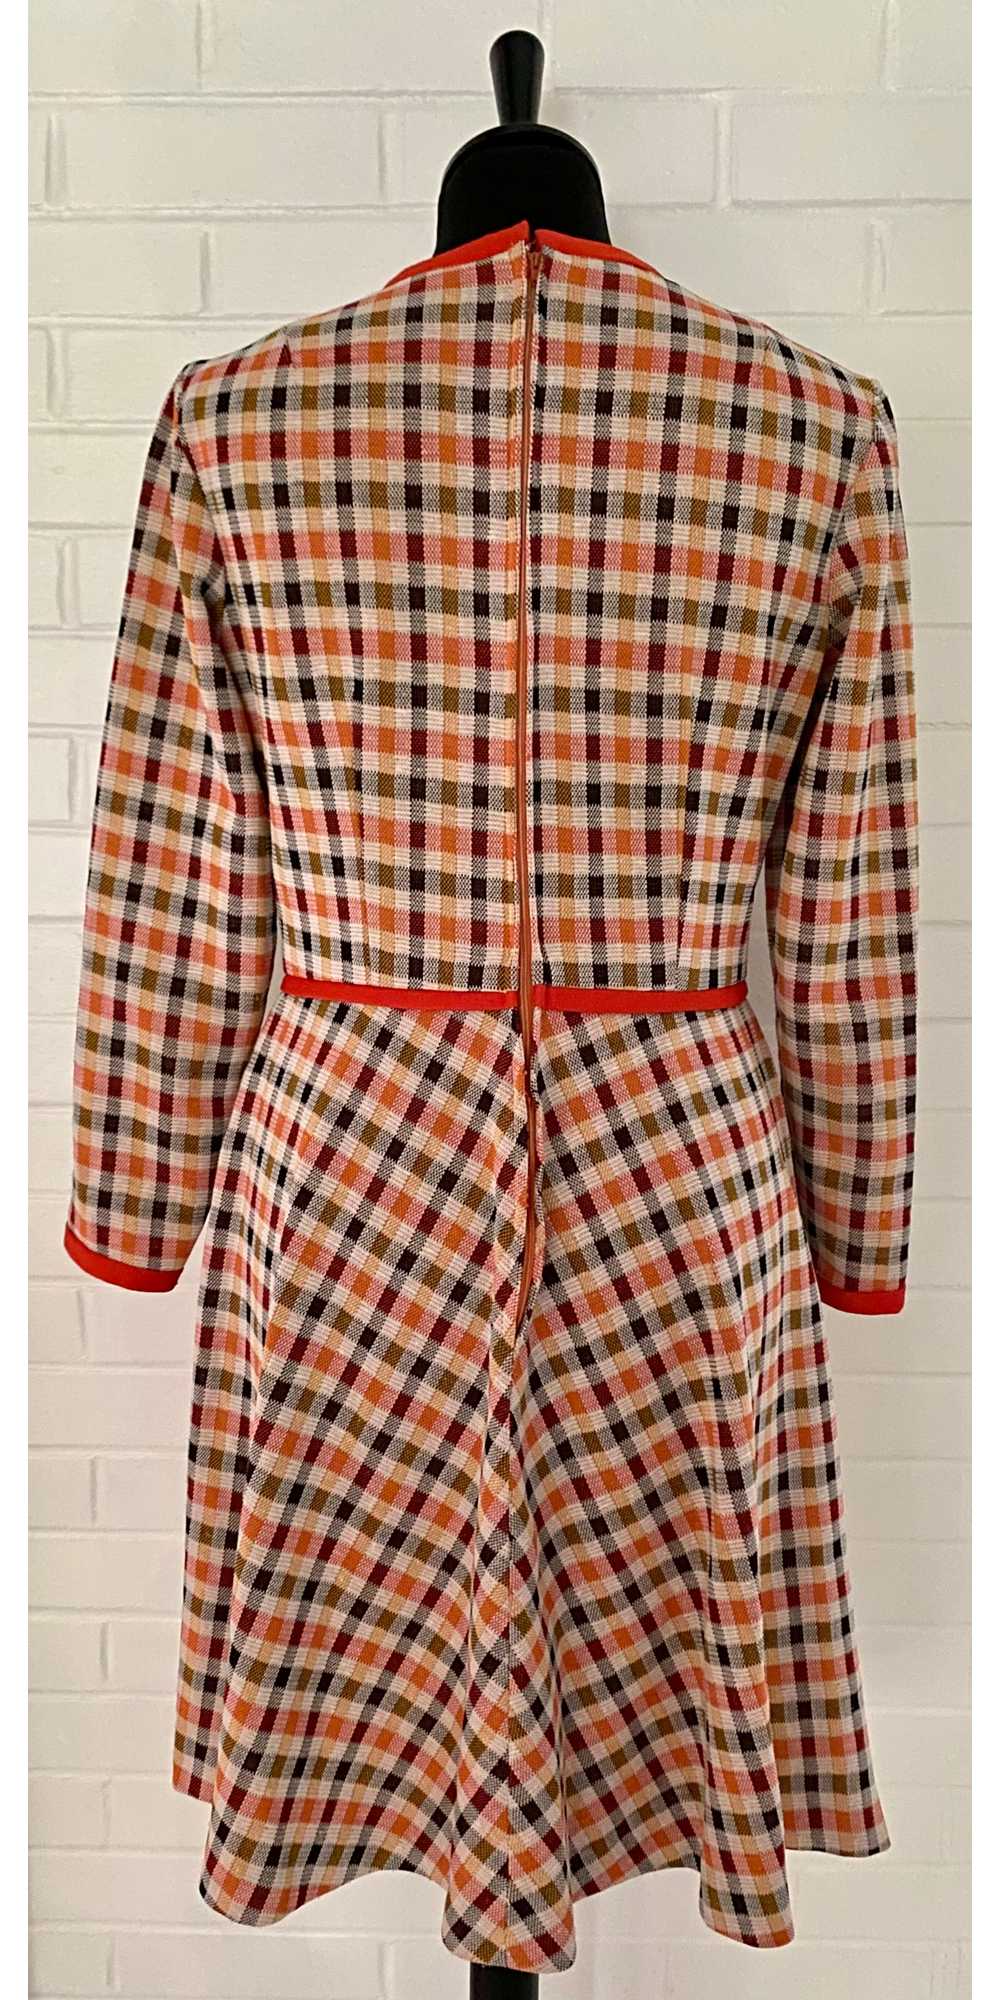 Late 60s/ Early 70s Bayberry Plaid Dress - image 3